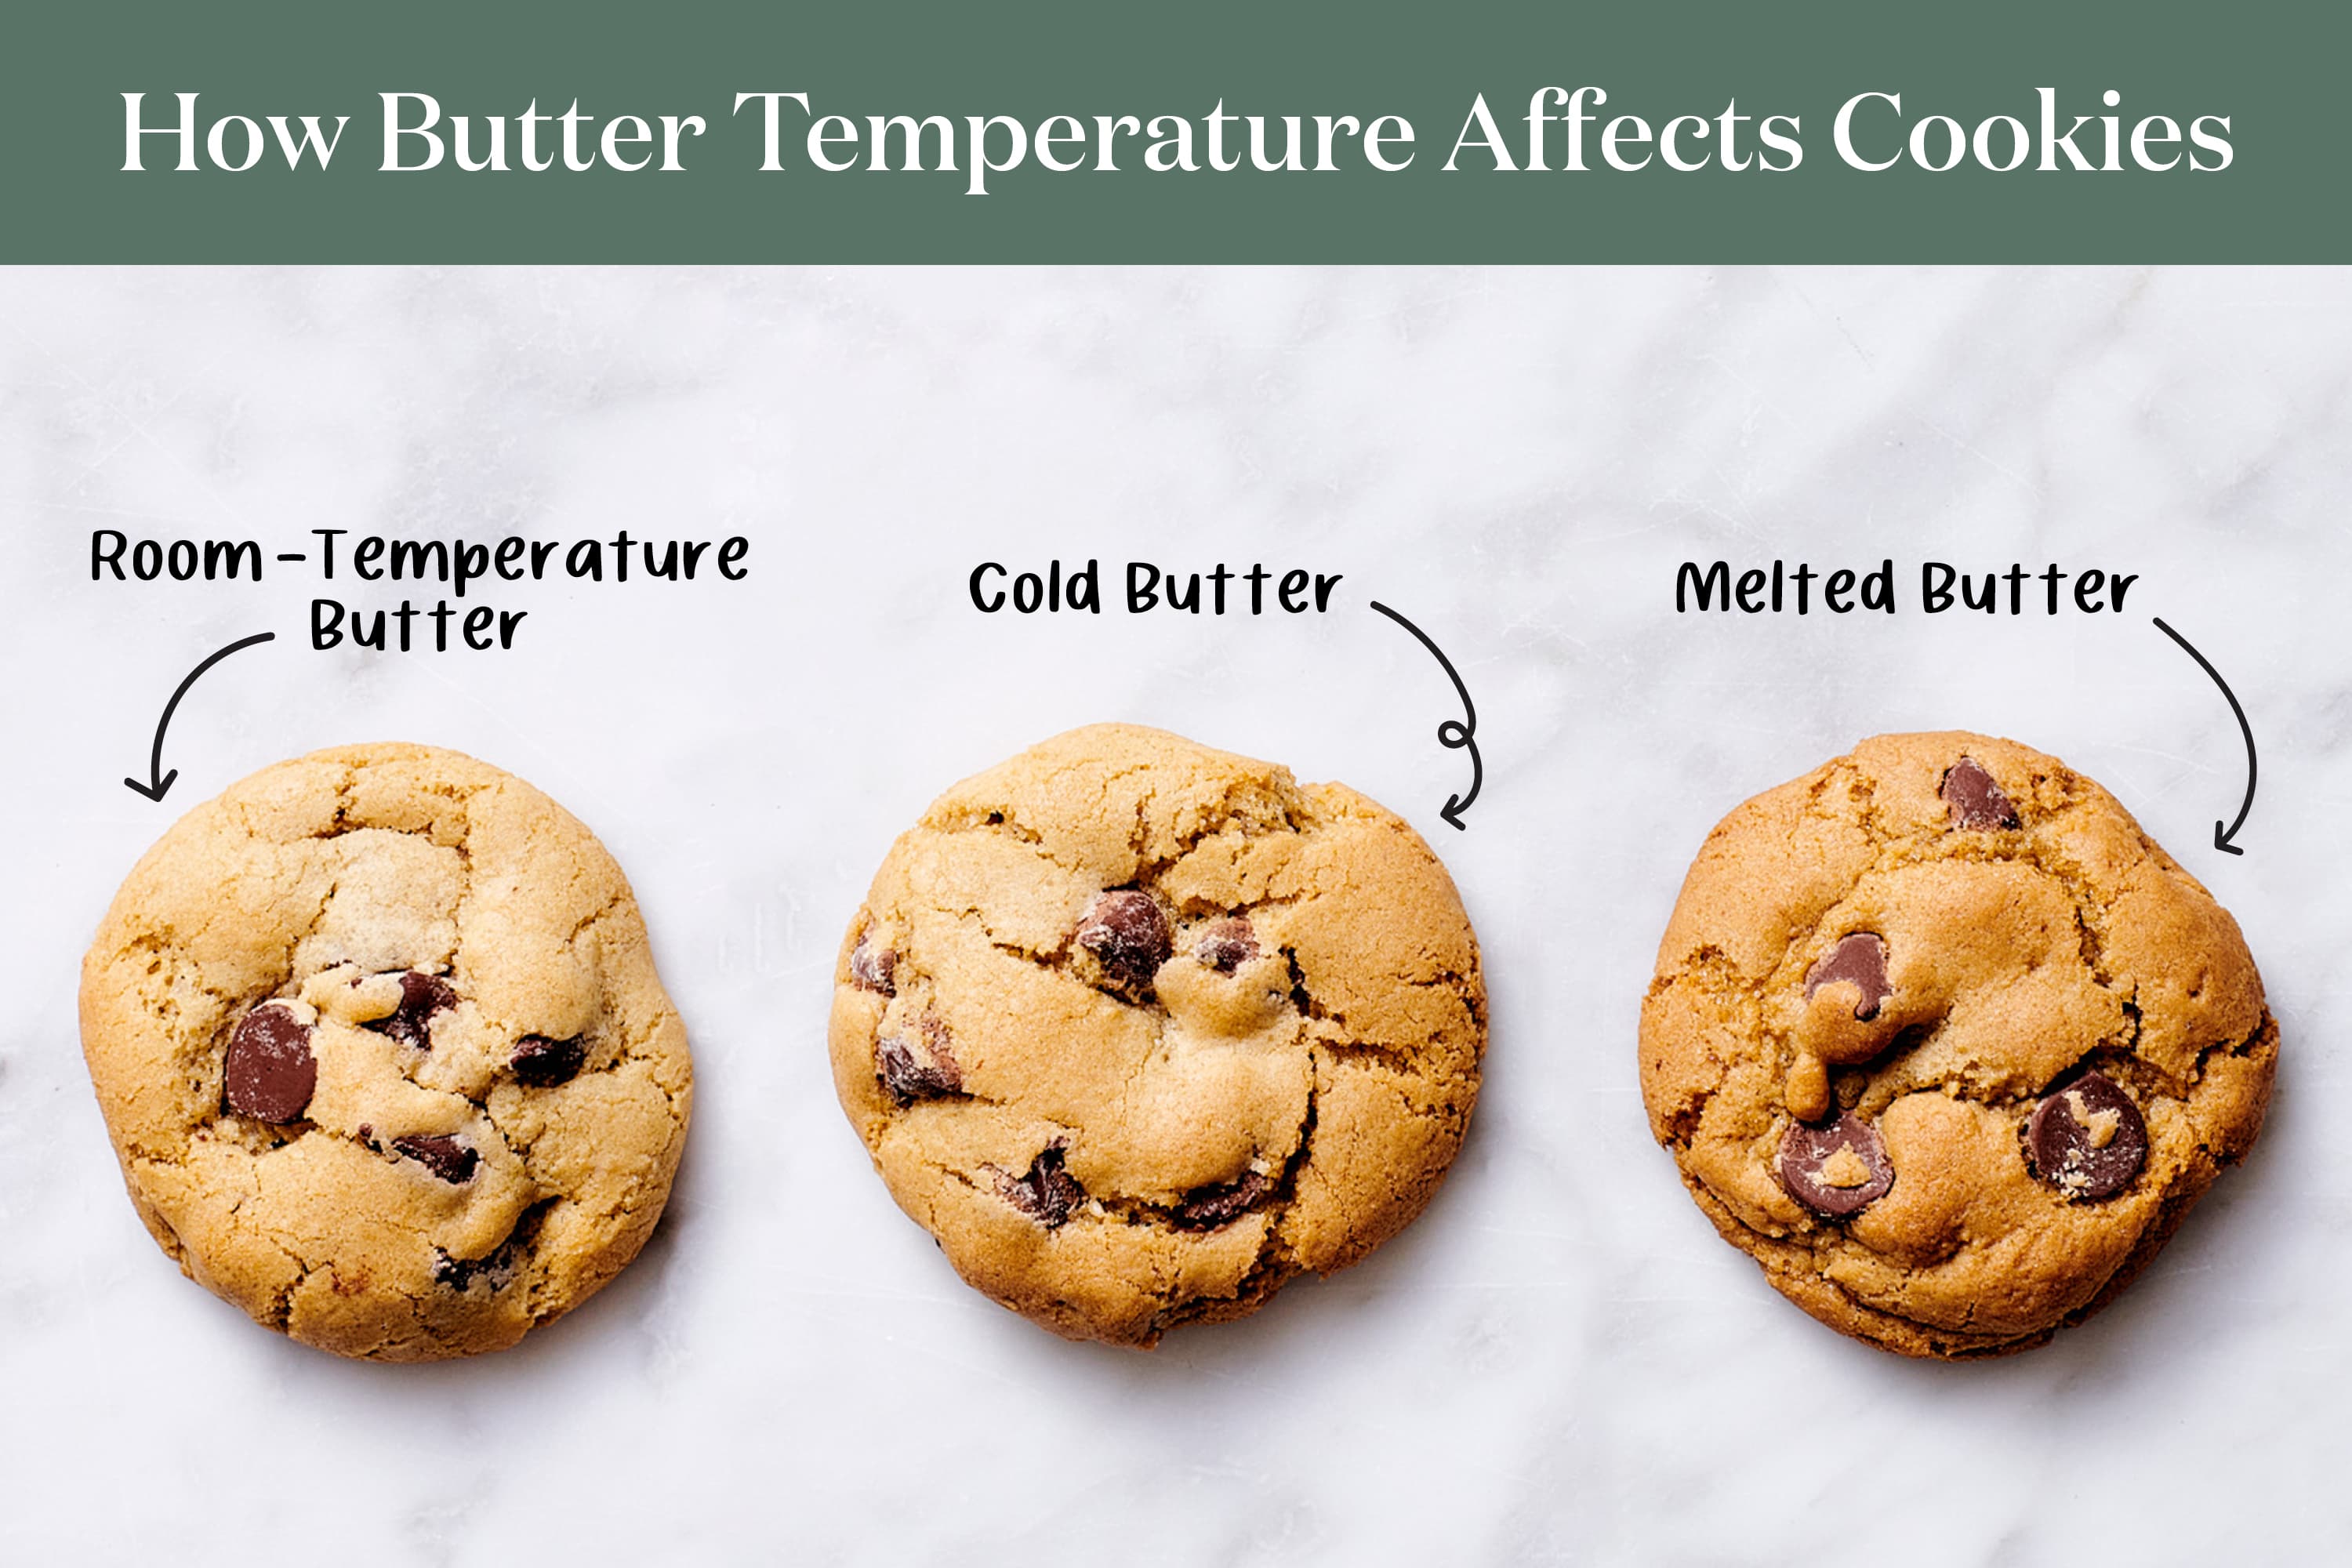 https://cdn.apartmenttherapy.info/image/upload/v1669847163/k/Design/2022-11/how-butter-temperature-affects-cookies/how-butter-temperature-affects-cookies-horizontal.jpg